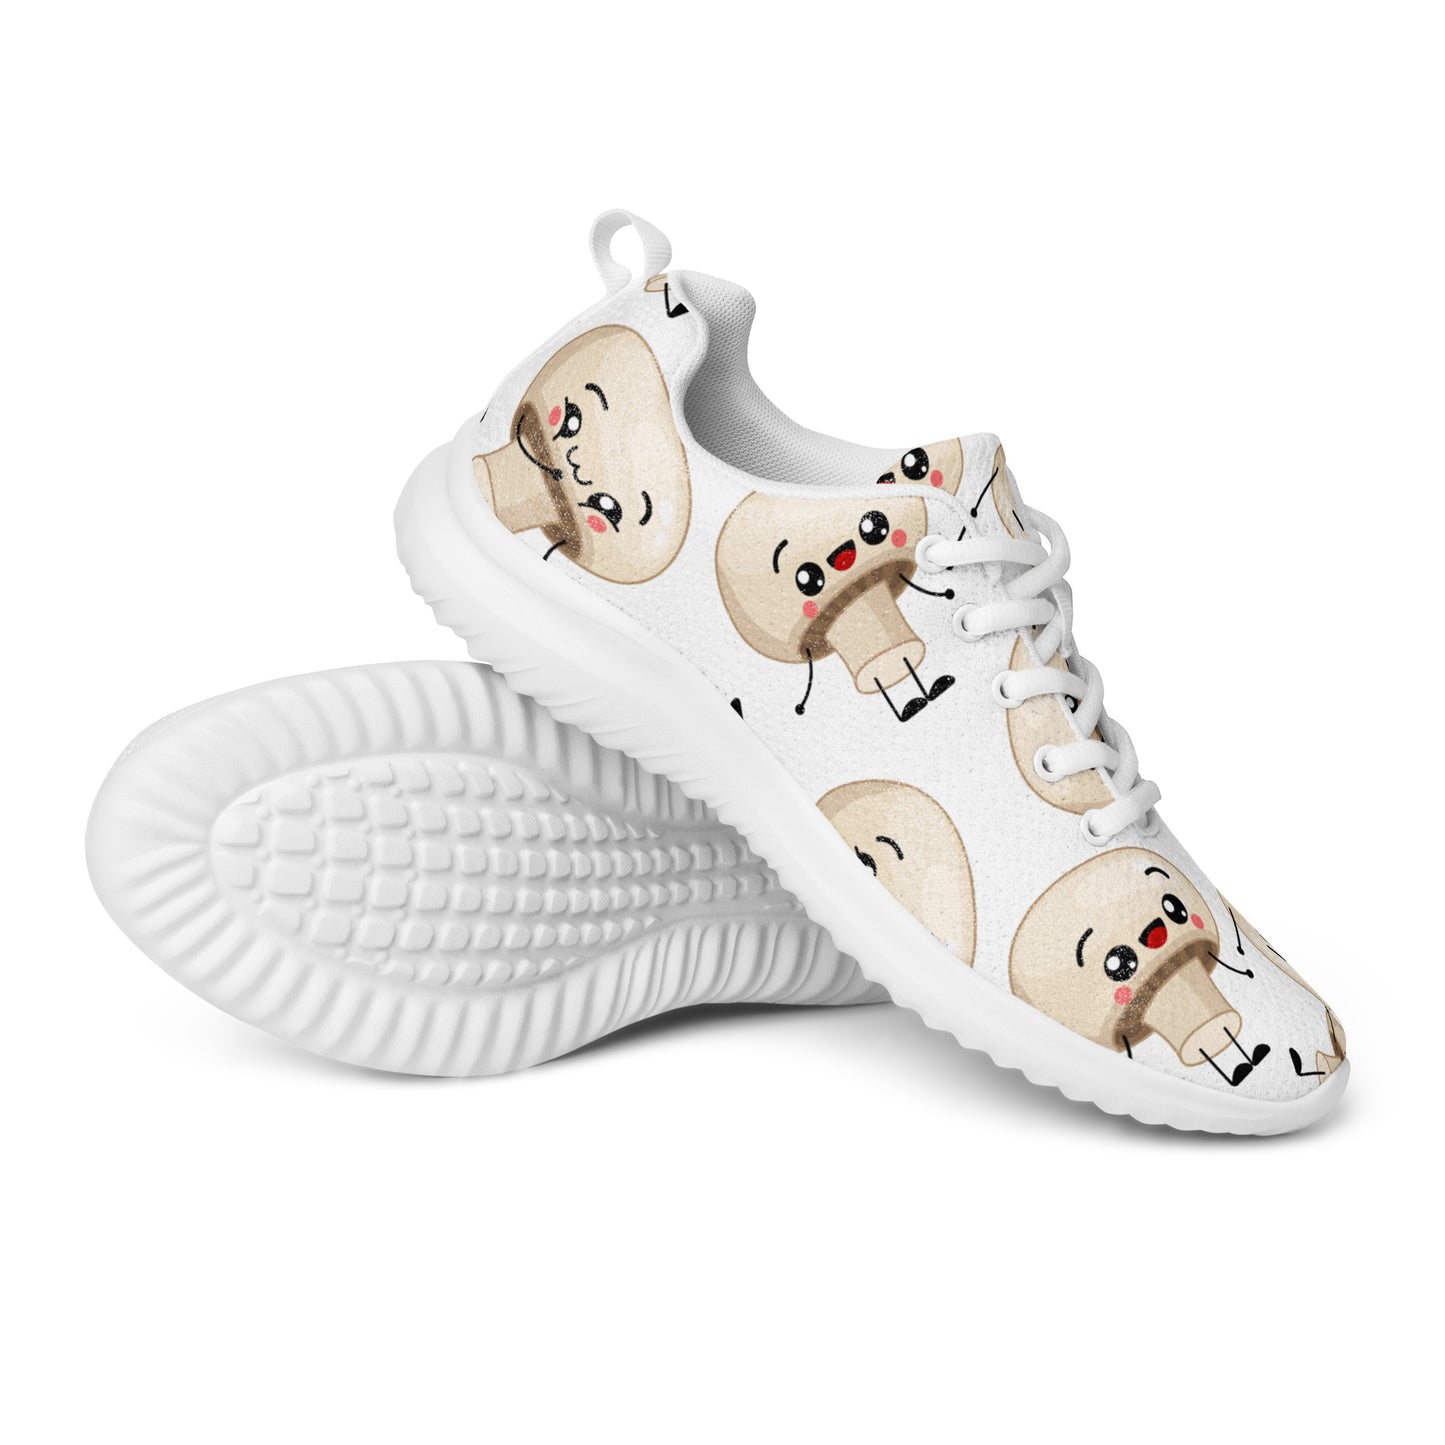 Cute Mushrooms - Women’s athletic shoes Womens Athletic Shoes